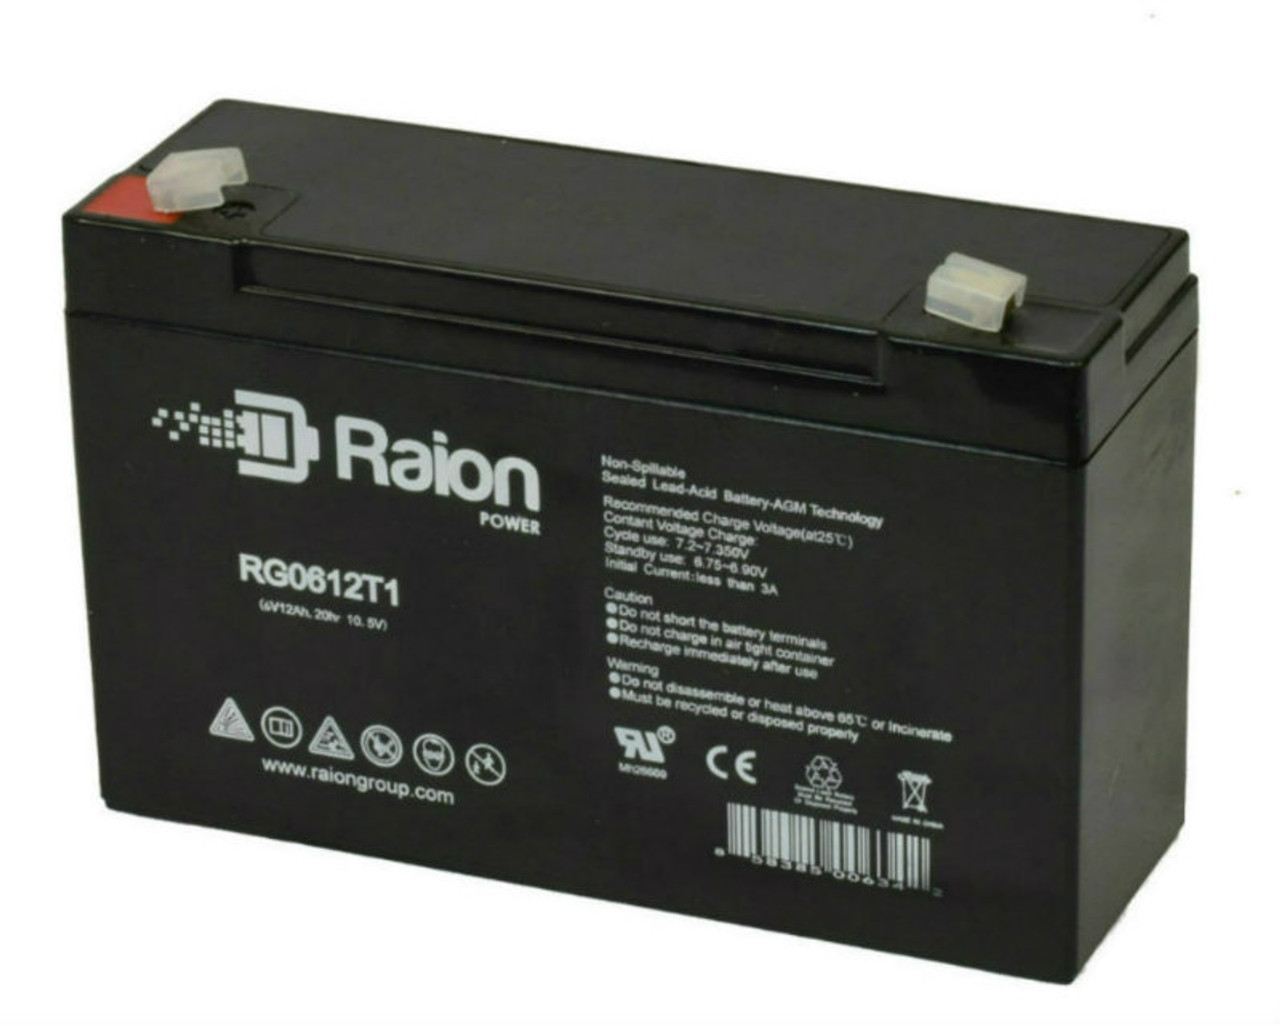 Raion Power RG06120T1 Replacement 6V 12Ah Emergency Light Battery for Lithonia ELB0610/12